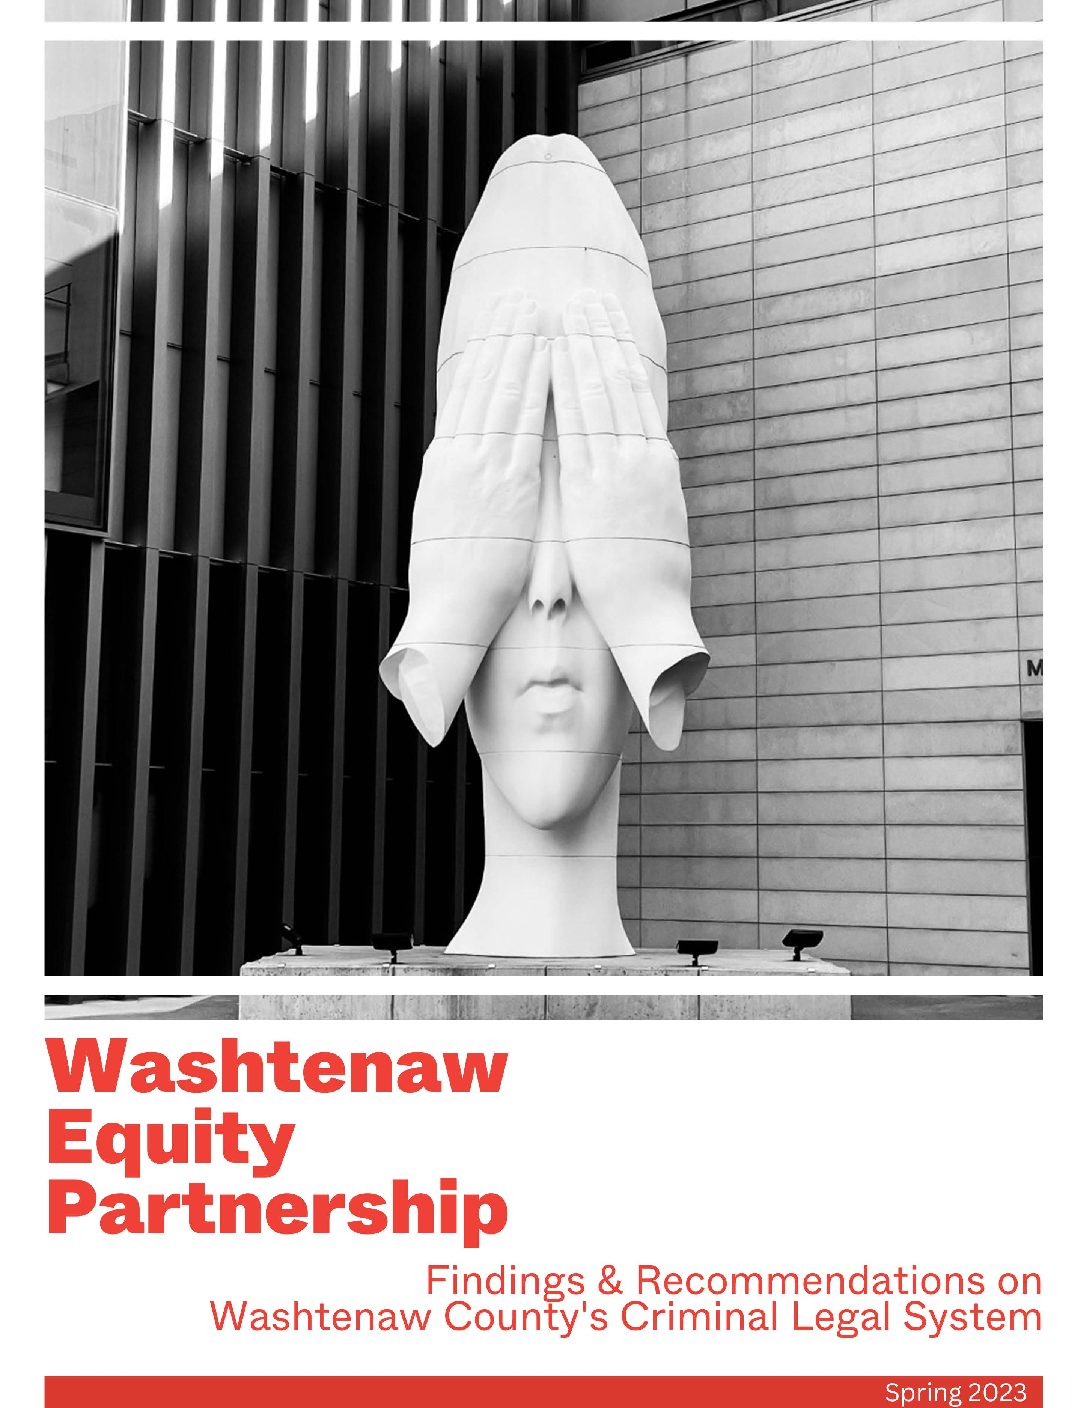 An Introduction to the Washtenaw Equity Partnership Report